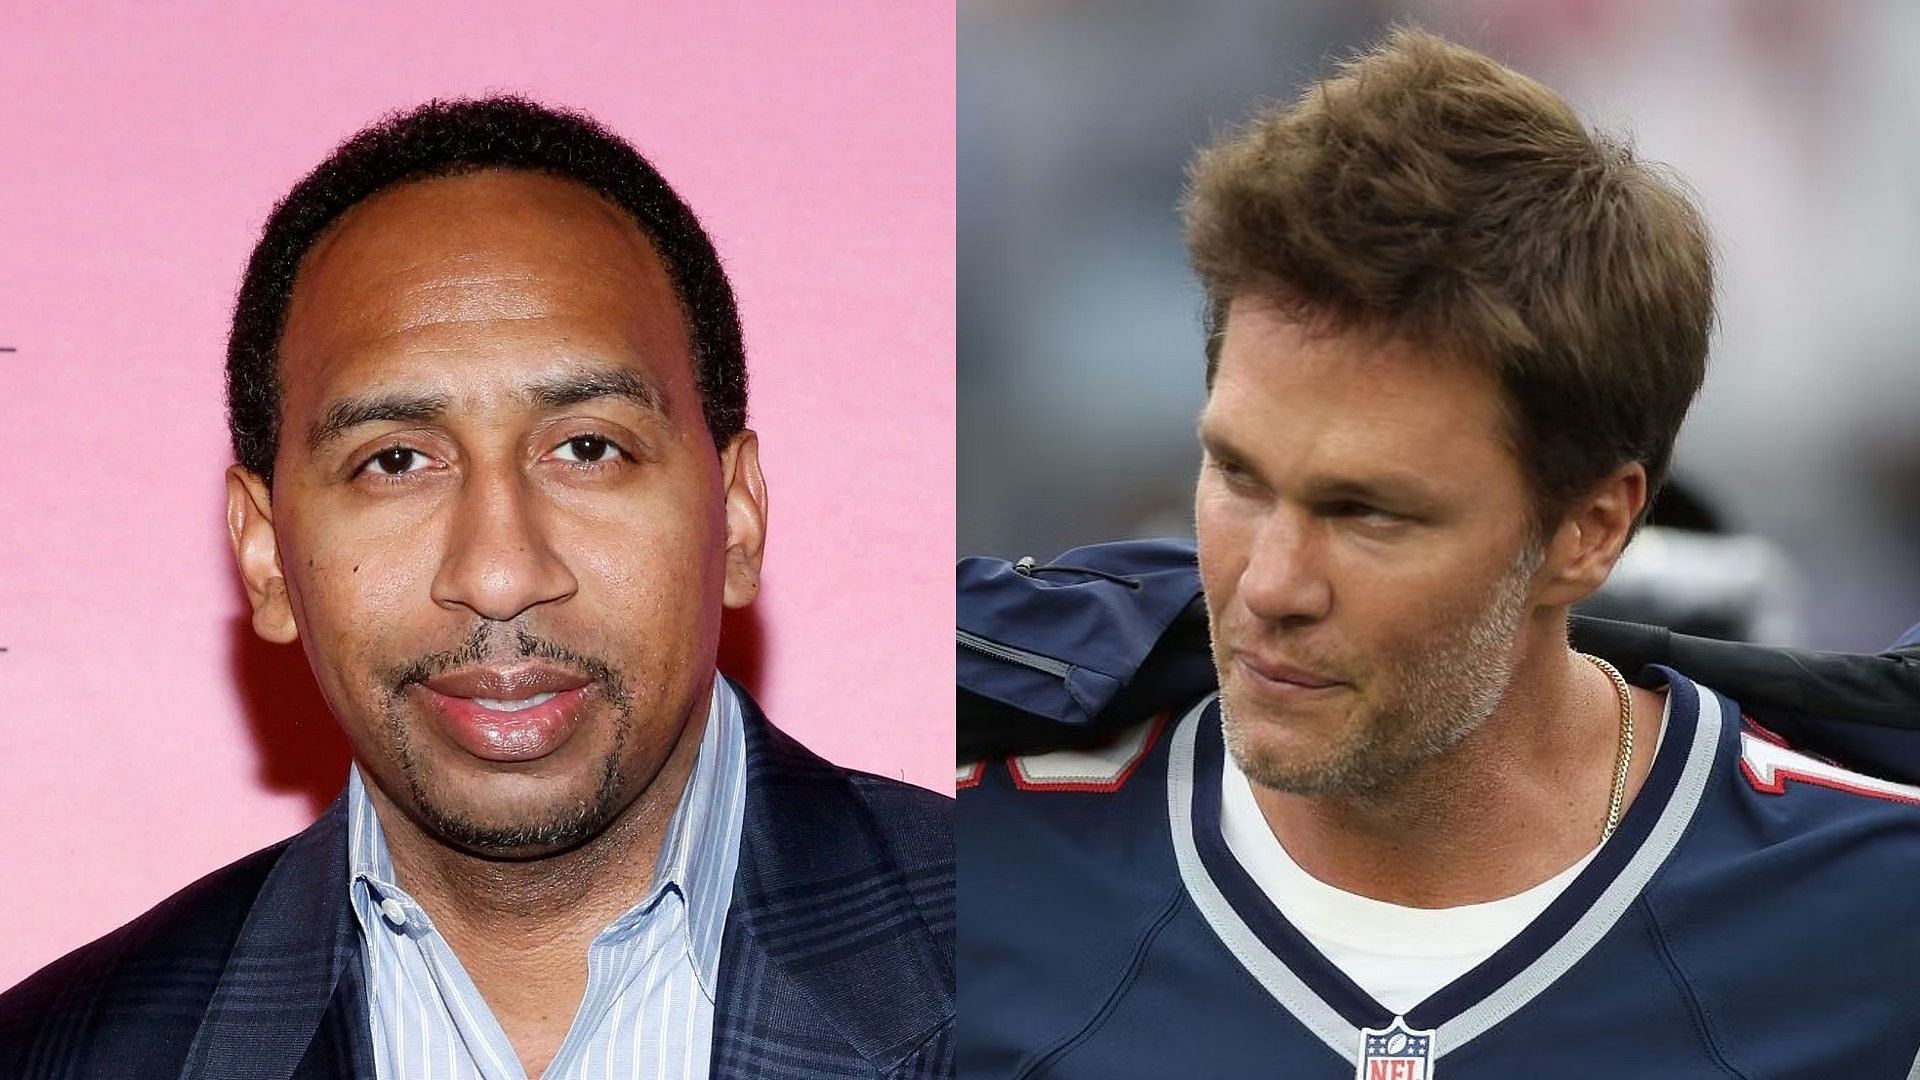 Stephen A. Smith dumps cold water on hopes for Tom Brady to save New York Jets